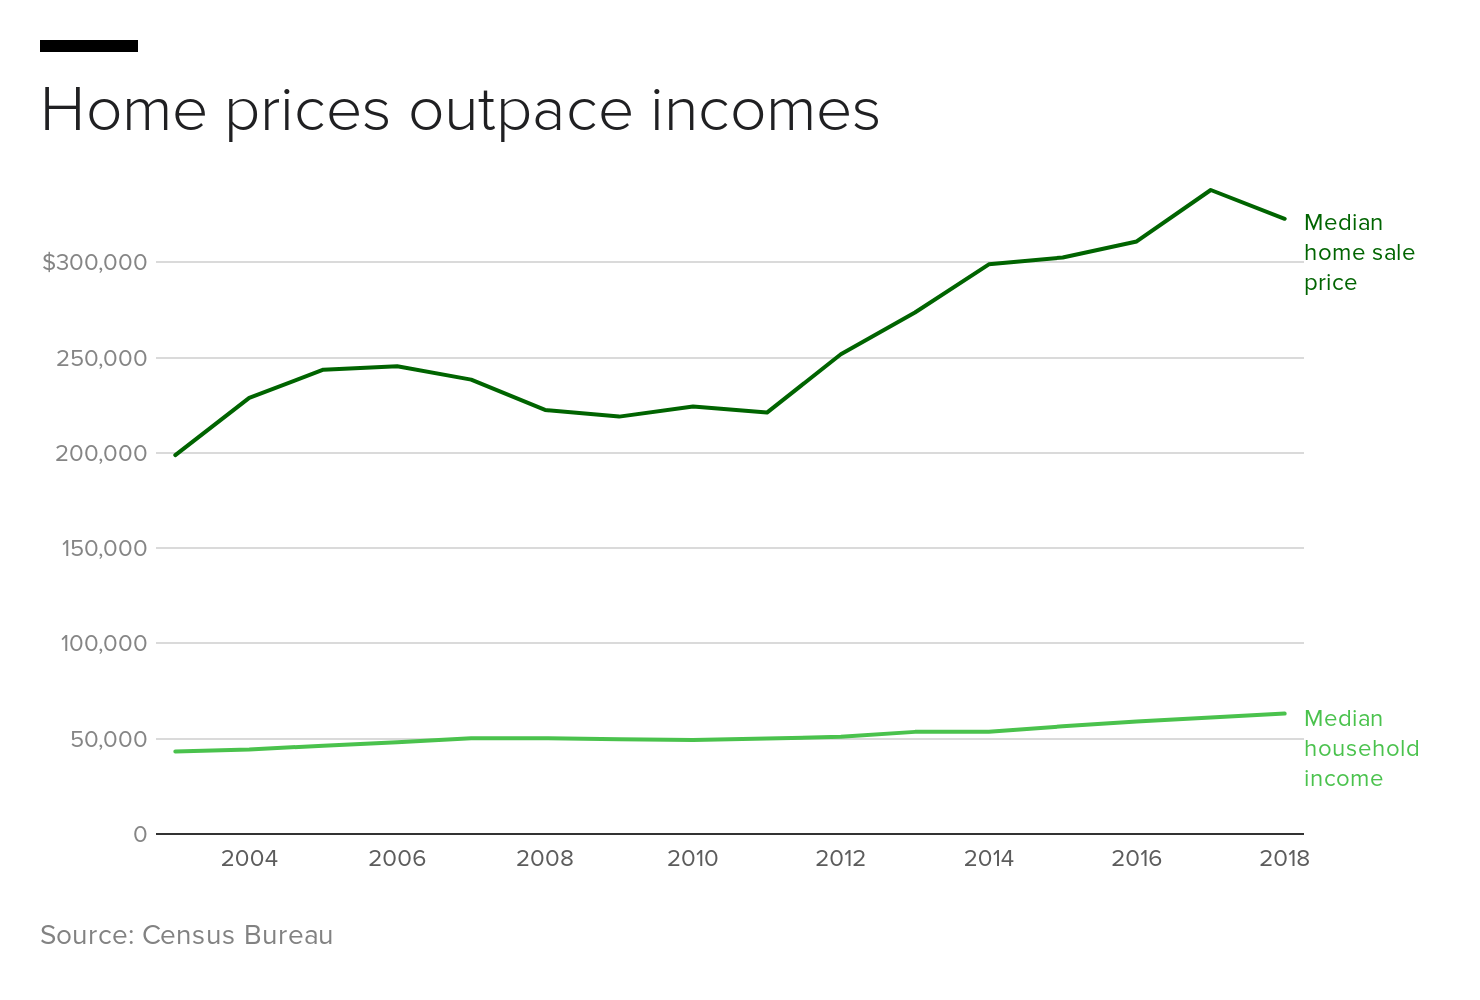 ykdvp-home-prices-outpace-incomes.png 